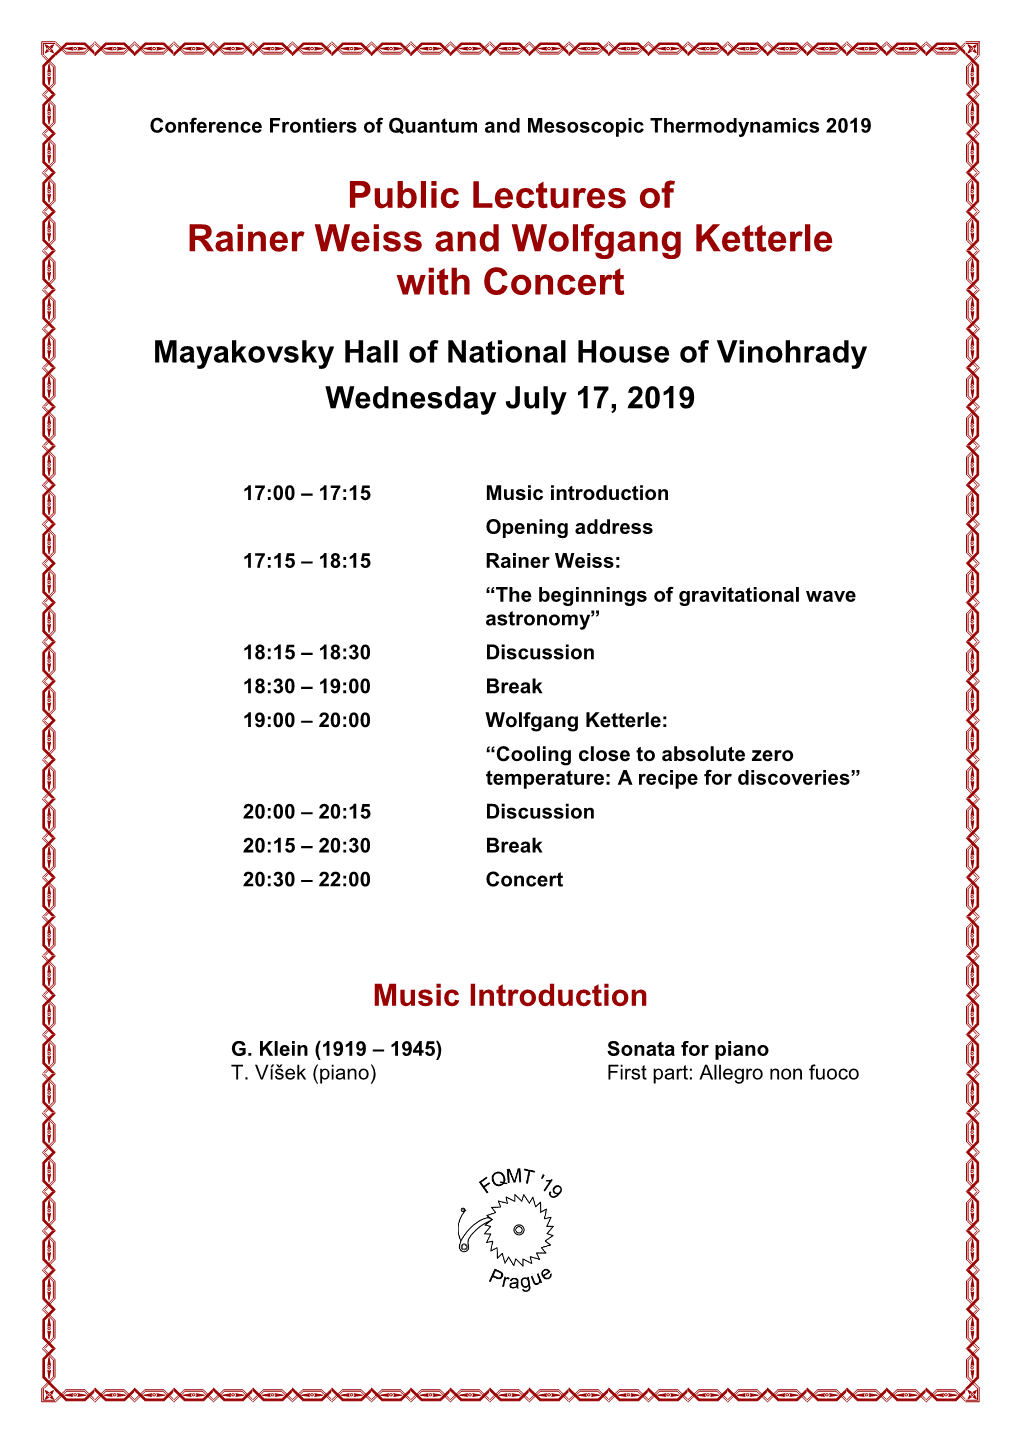 Public Lectures of Rainer Weiss and Wolfgang Ketterle And